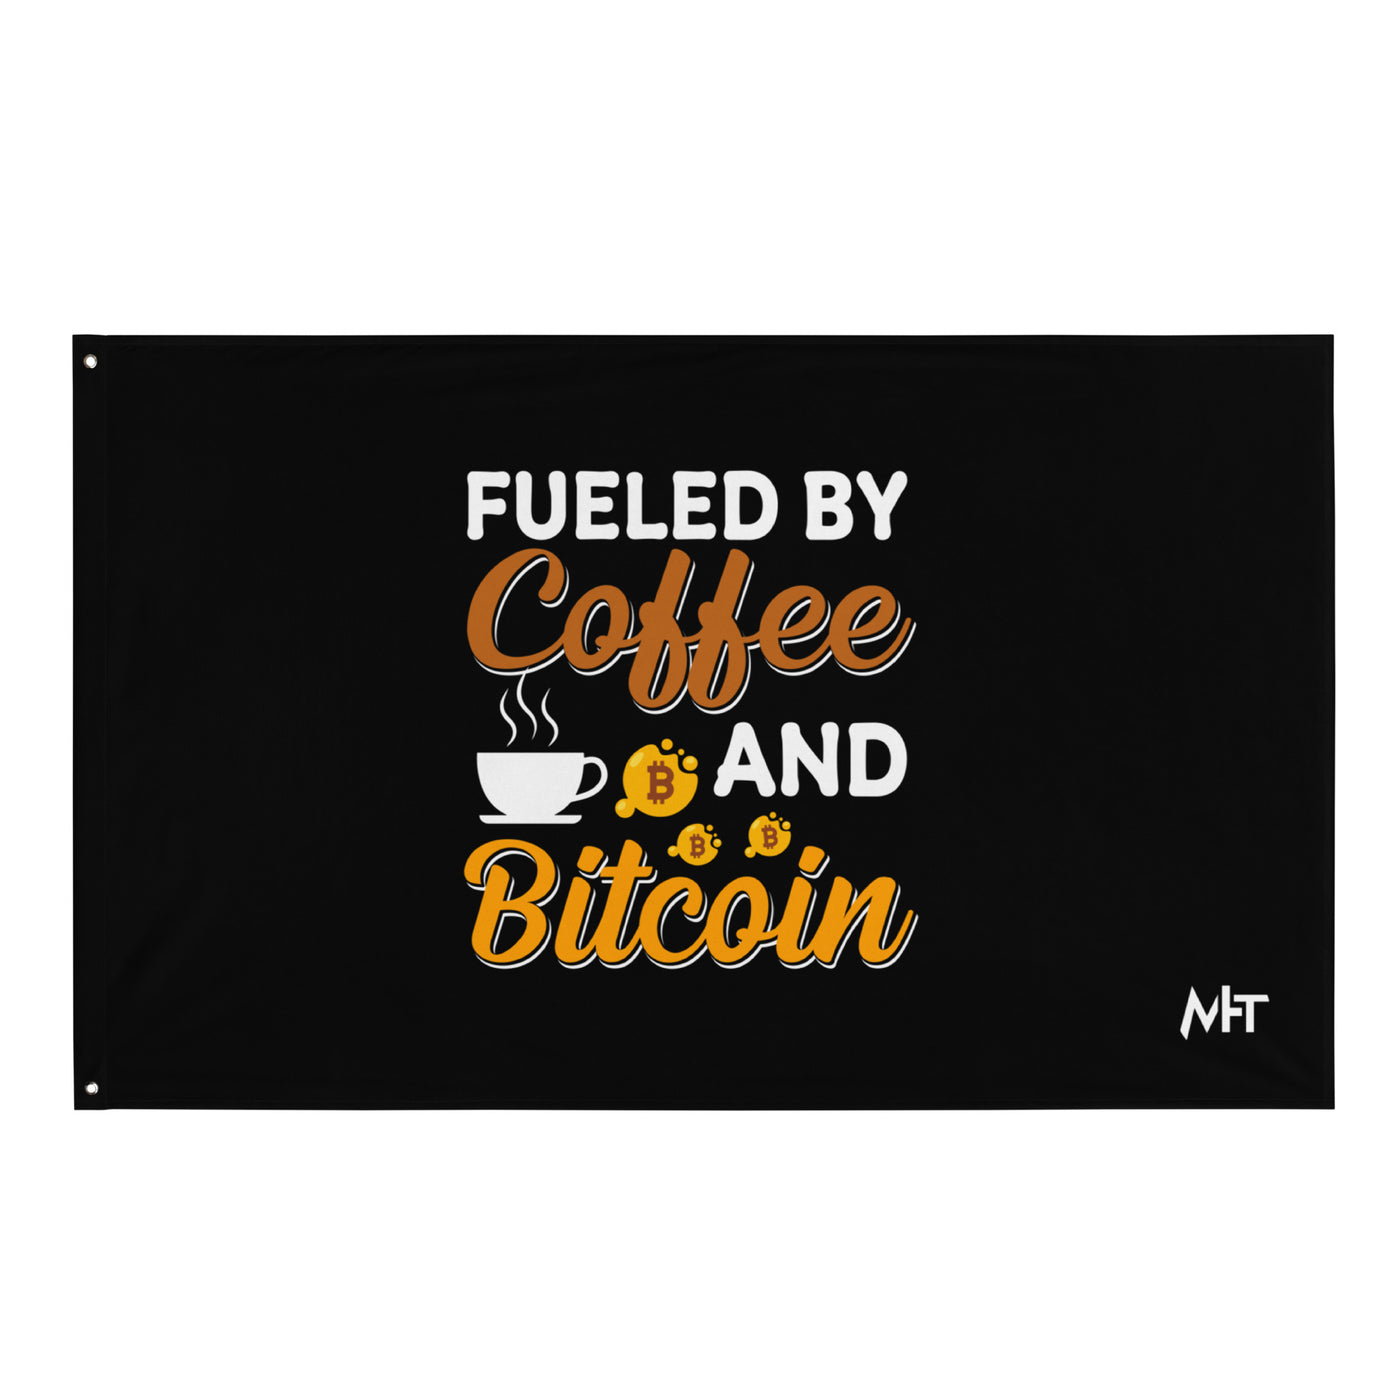 Fueled by Coffee and Bitcoin V1 - Flag